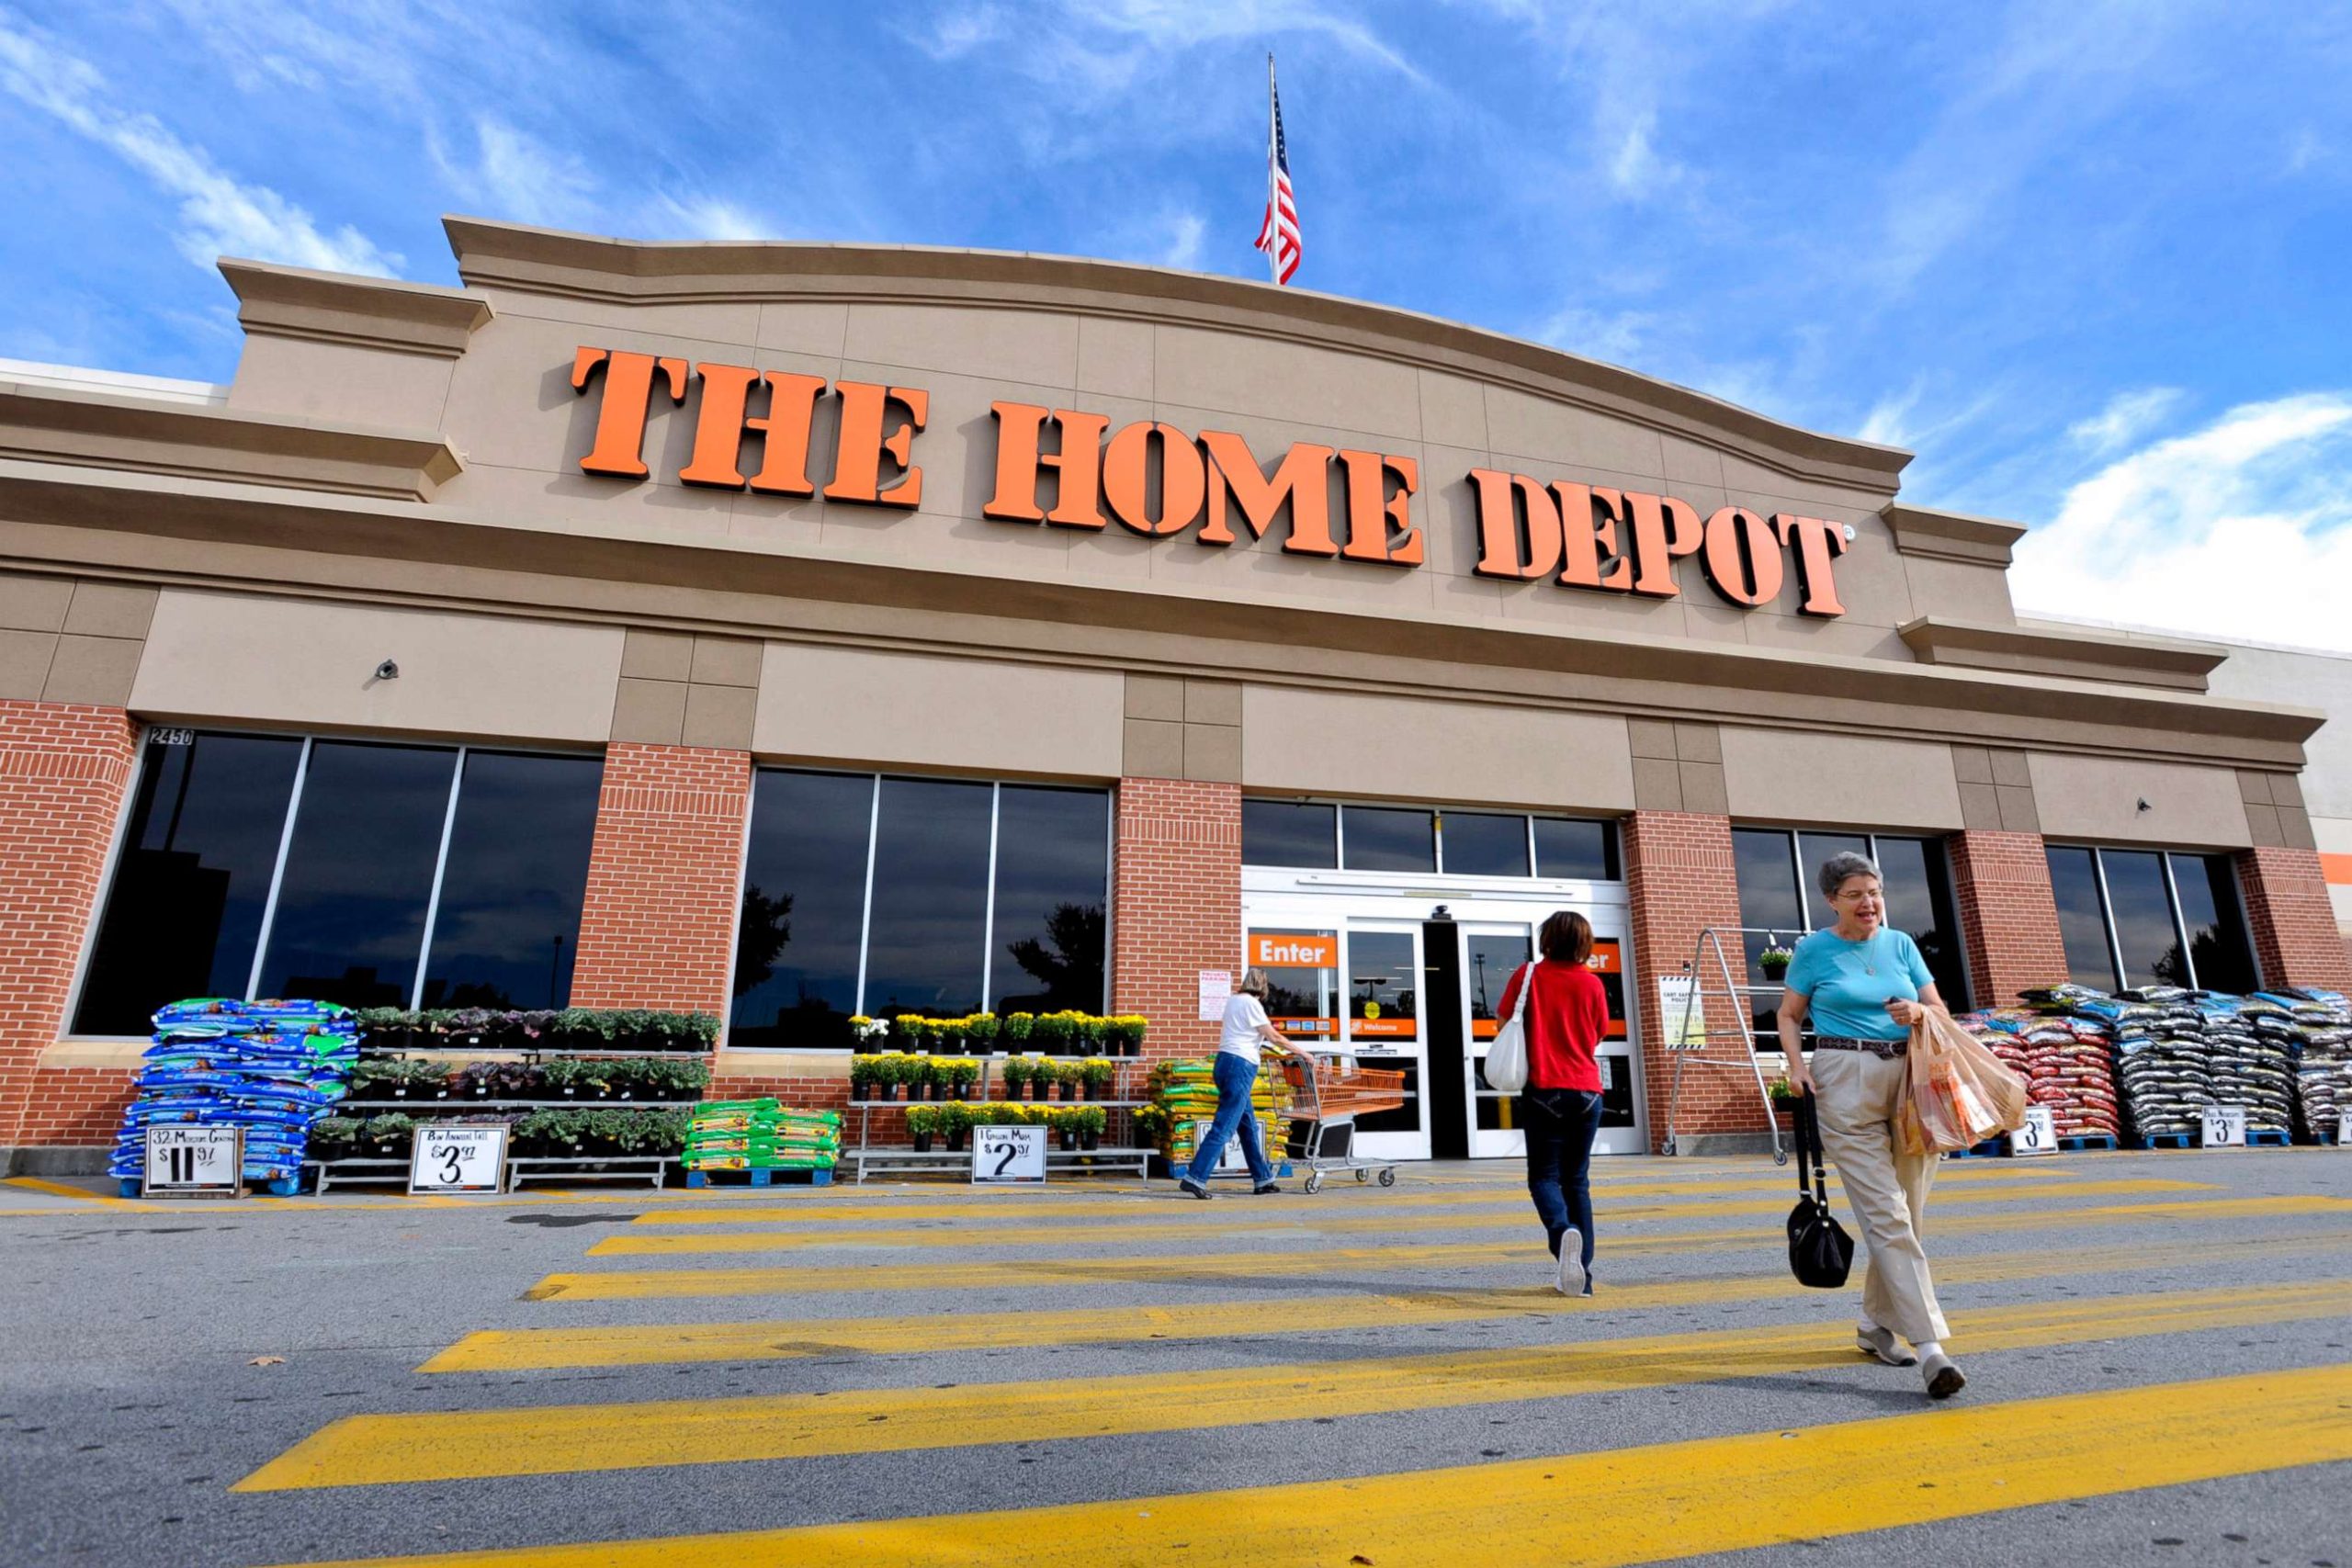 Is Home Depot Open on 4th of July?